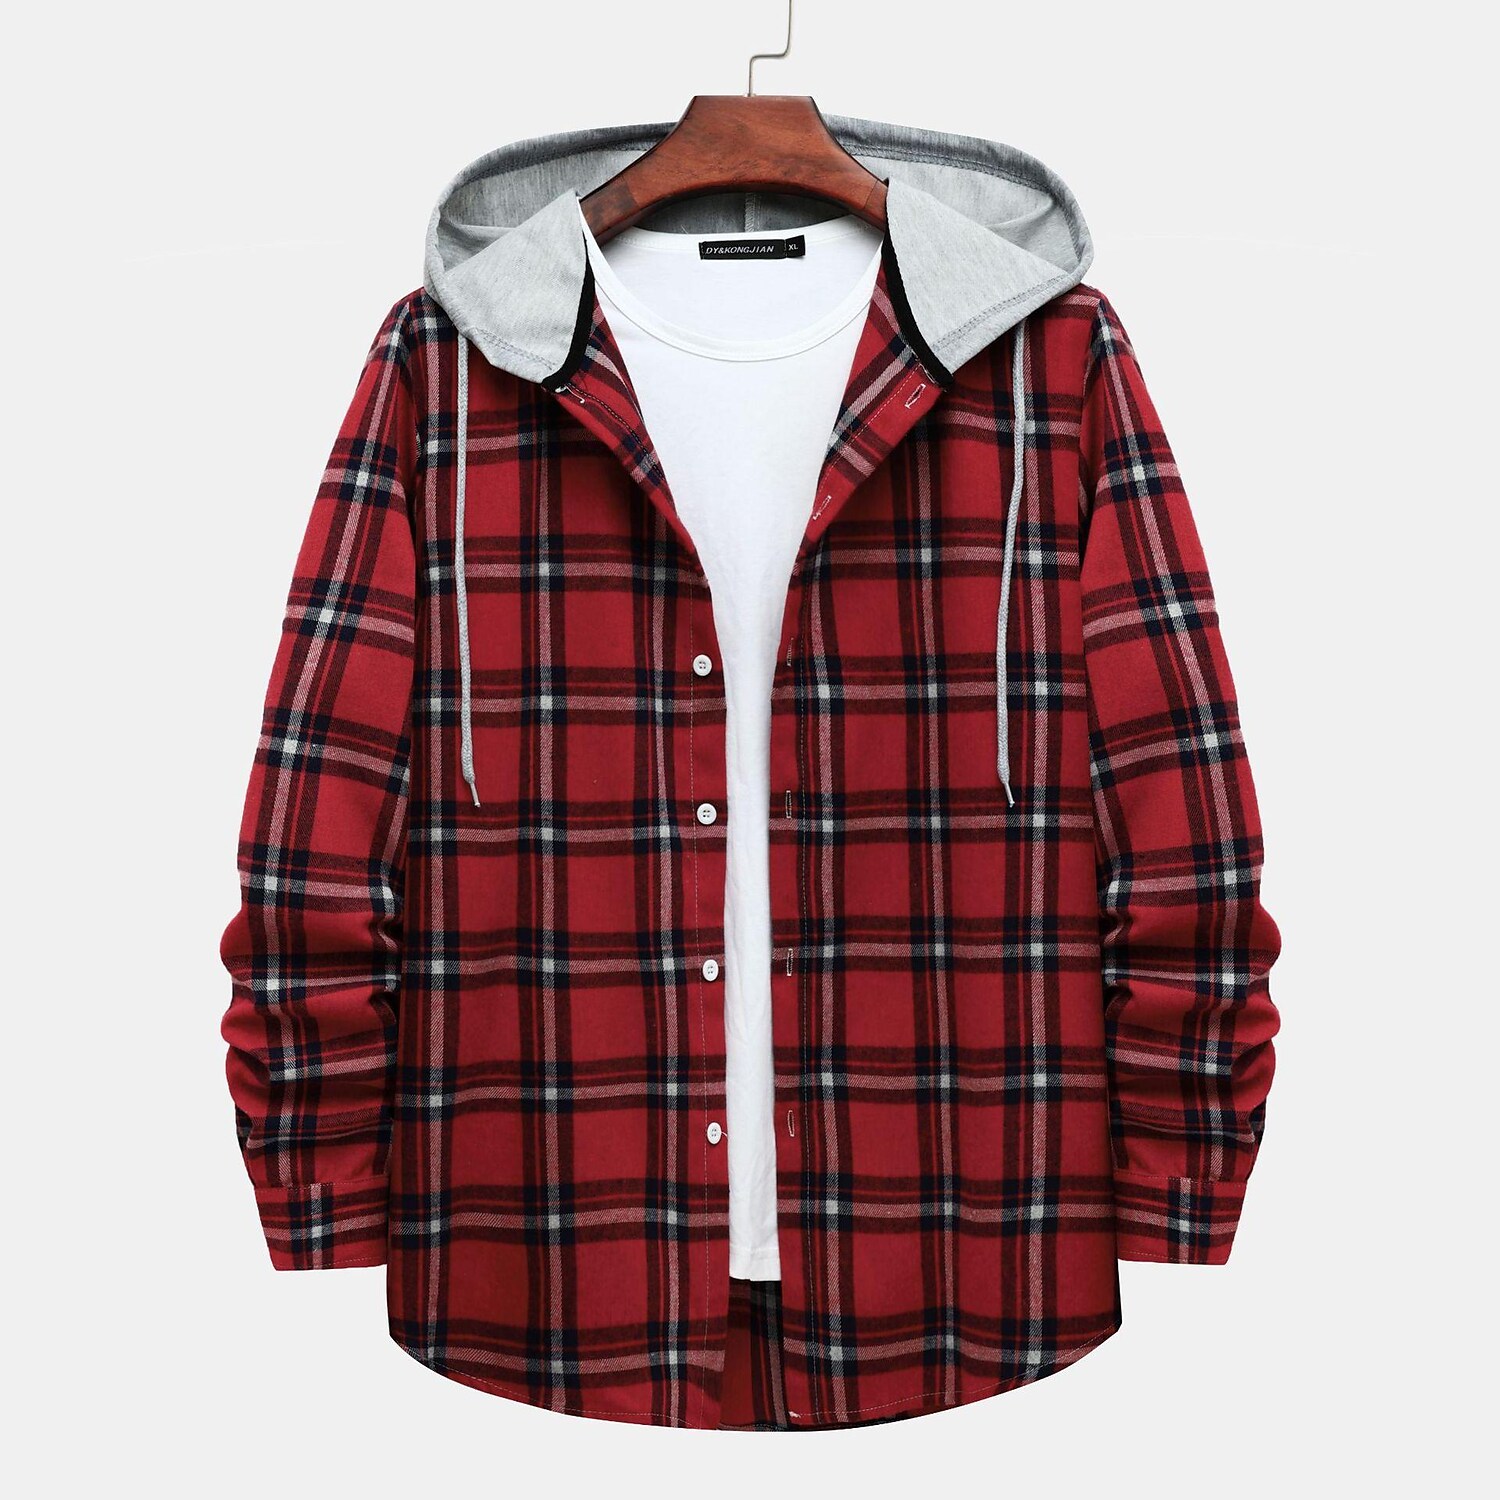 Men's Long Sleeve Flannel Brushed Check Hooded Casual Cardigan Shirt-poisonstreetwear.com